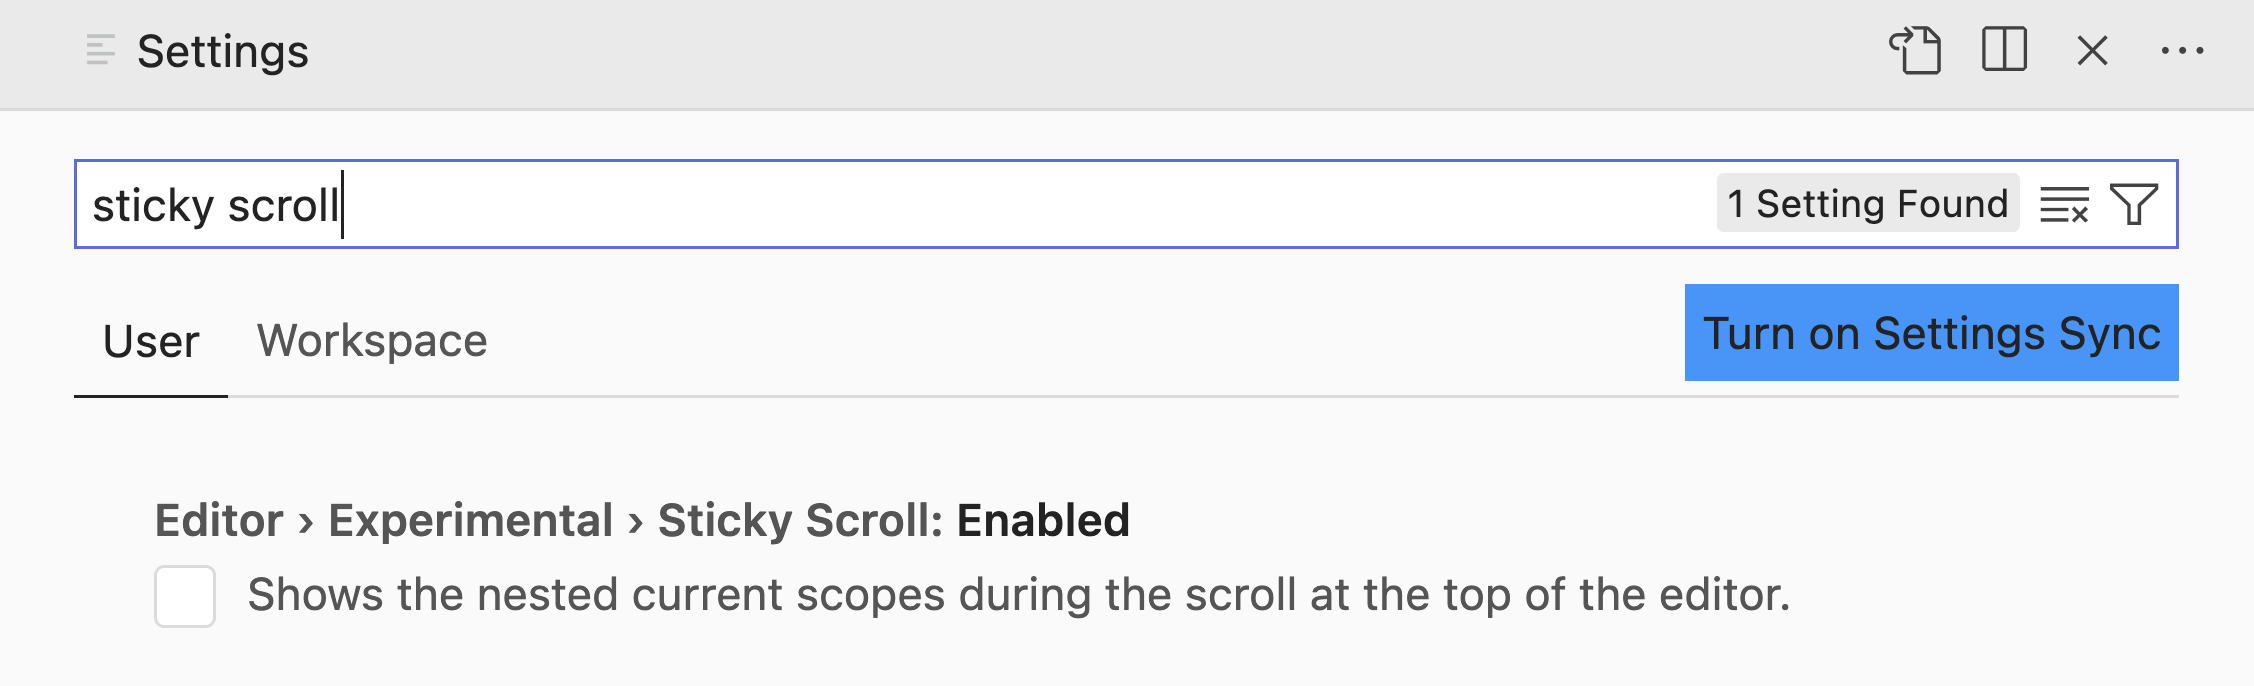 VS Code settings showing the Sticky Scroll option.